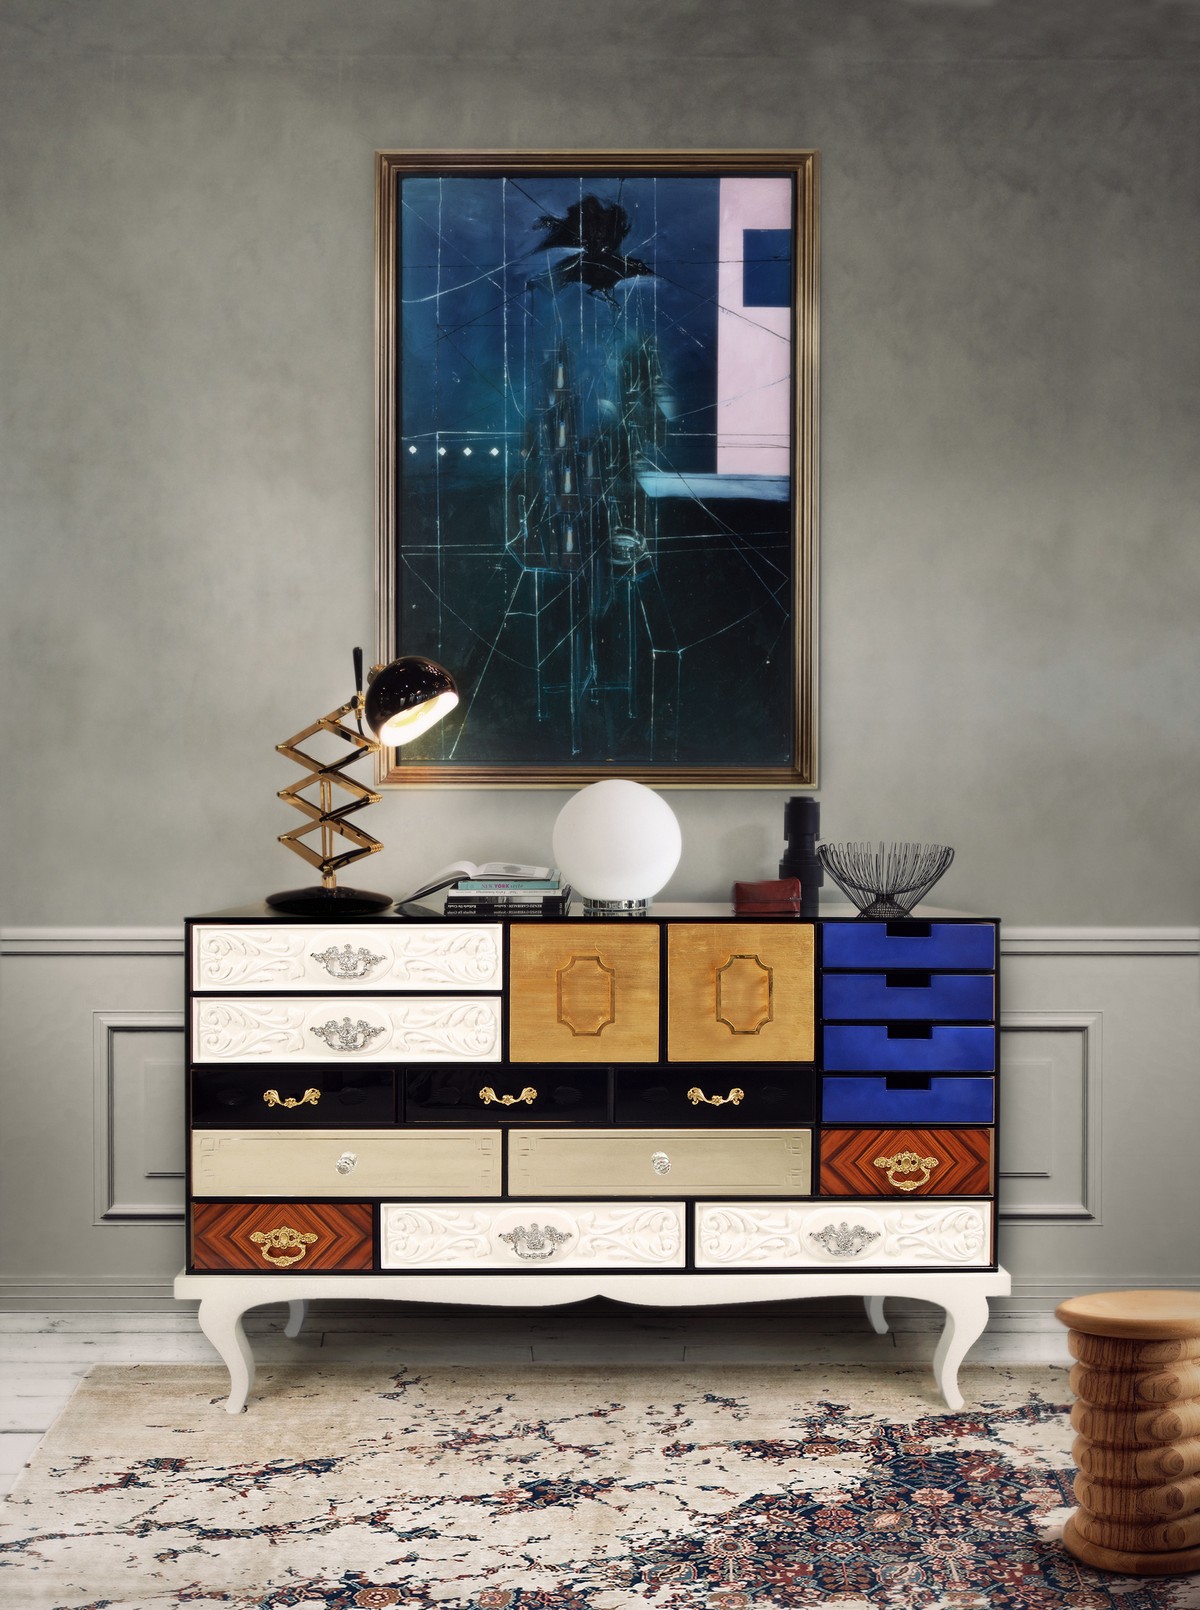 Modern And Luxurious Sideboards To Complete Your Room Decor | At Sideboards and Buffets Blog we bring the best selection of outstanding design pieces for your home. #sideboards #sideboardsandbuffets #modernsideboards #luxurioussideboards